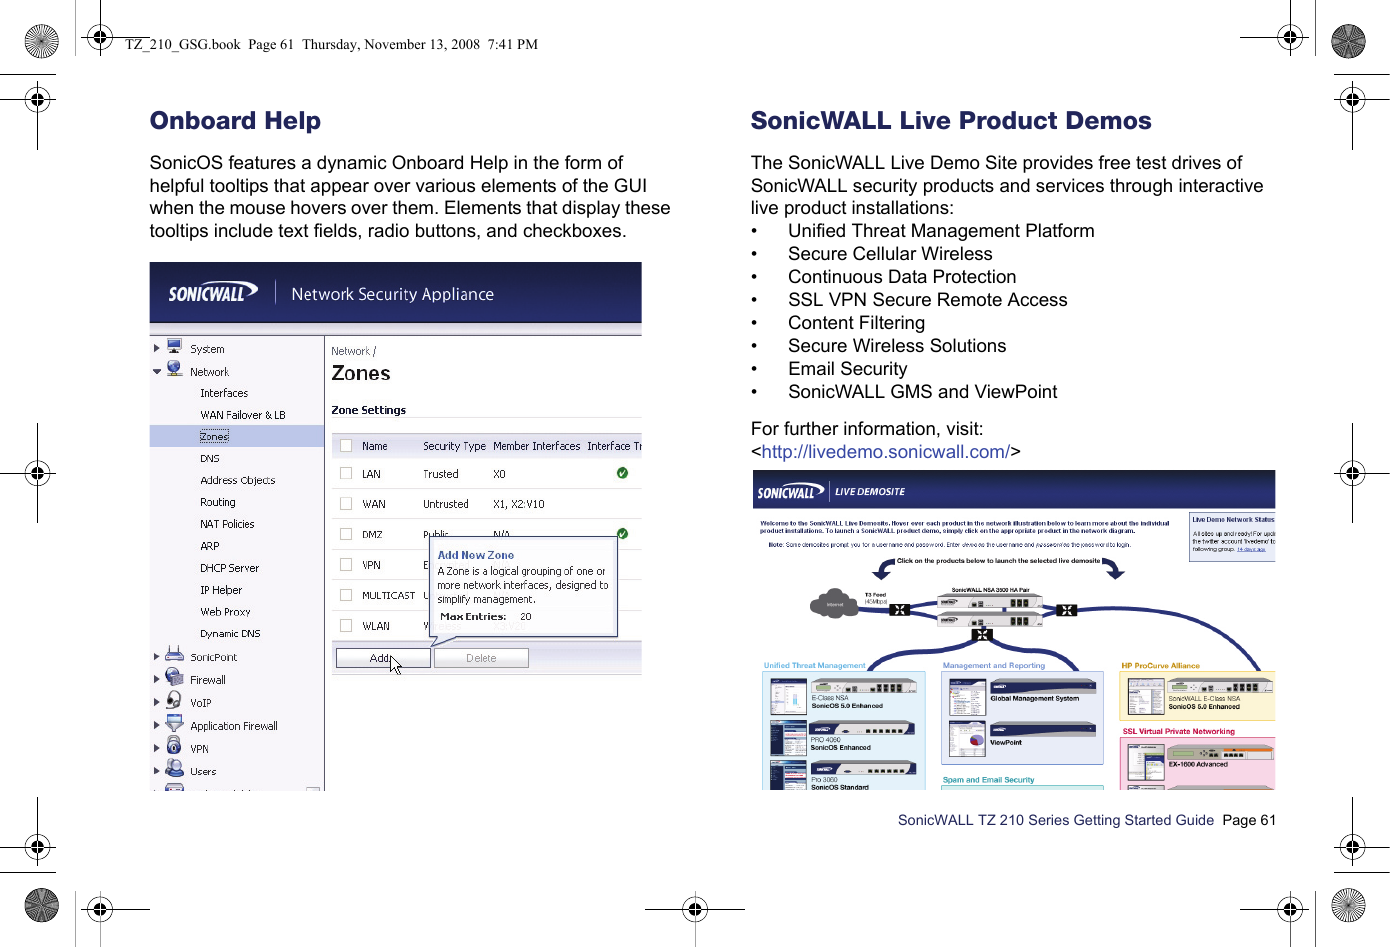 SonicWALL TZ 210 Series Getting Started Guide  Page 61Onboard HelpSonicOS features a dynamic Onboard Help in the form of helpful tooltips that appear over various elements of the GUI when the mouse hovers over them. Elements that display these tooltips include text fields, radio buttons, and checkboxes.SonicWALL Live Product DemosThe SonicWALL Live Demo Site provides free test drives of SonicWALL security products and services through interactive live product installations:• Unified Threat Management Platform• Secure Cellular Wireless• Continuous Data Protection• SSL VPN Secure Remote Access• Content Filtering• Secure Wireless Solutions• Email Security• SonicWALL GMS and ViewPointFor further information, visit:&lt;http://livedemo.sonicwall.com/&gt;TZ_210_GSG.book  Page 61  Thursday, November 13, 2008  7:41 PM